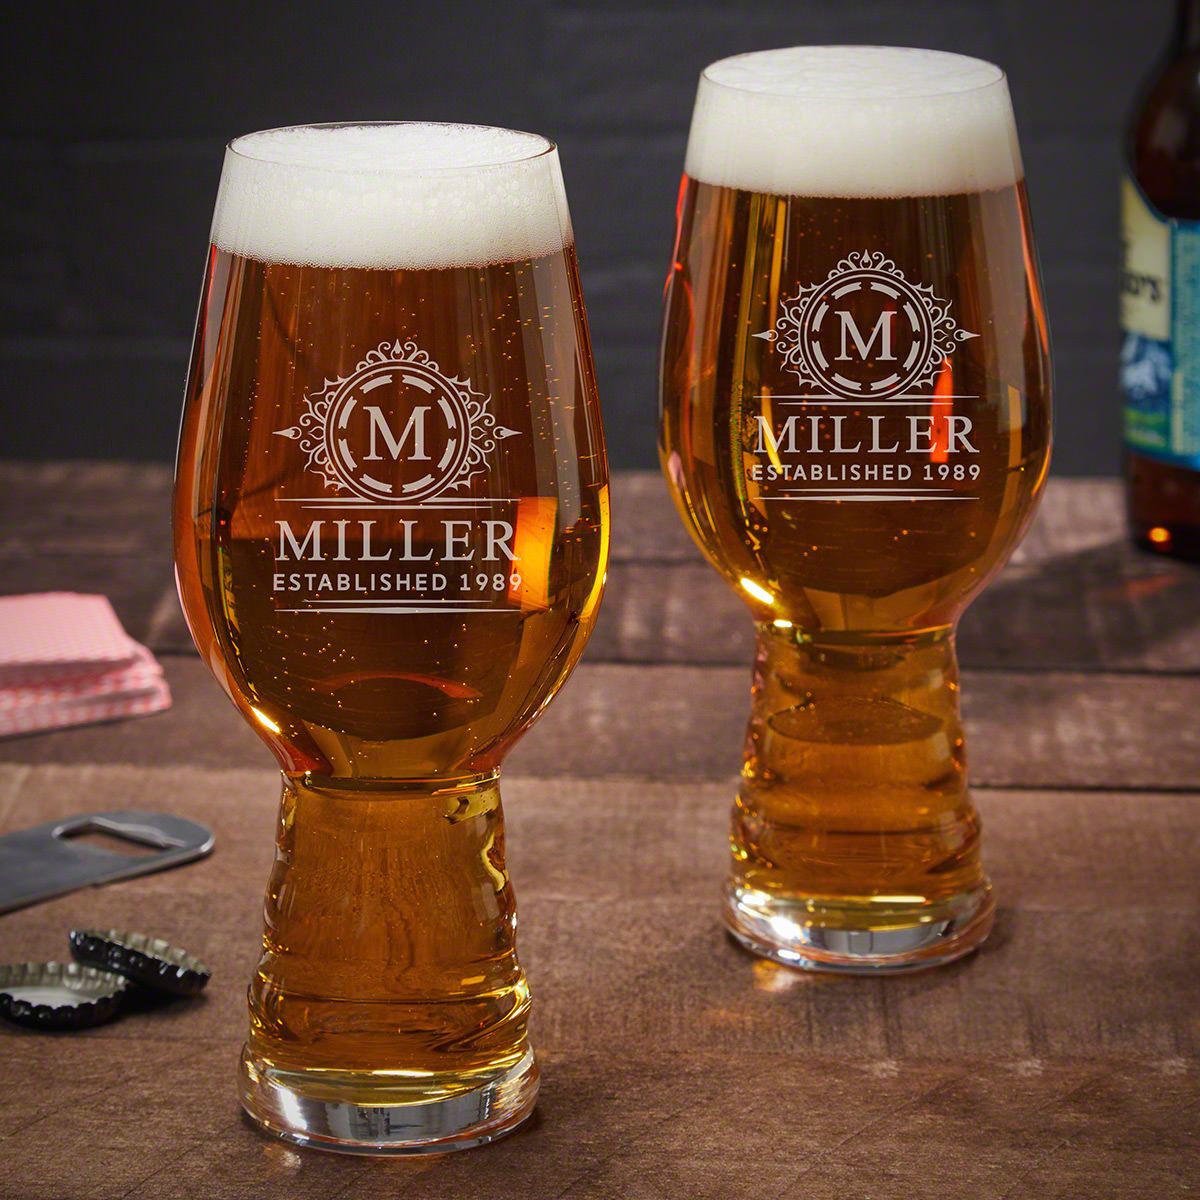 https://images.homewetbar.com/media/catalog/product/h/a/hamilton-personalized-ipa-glass_-set-of-2-p_10400.jpg?store=default&image-type=image